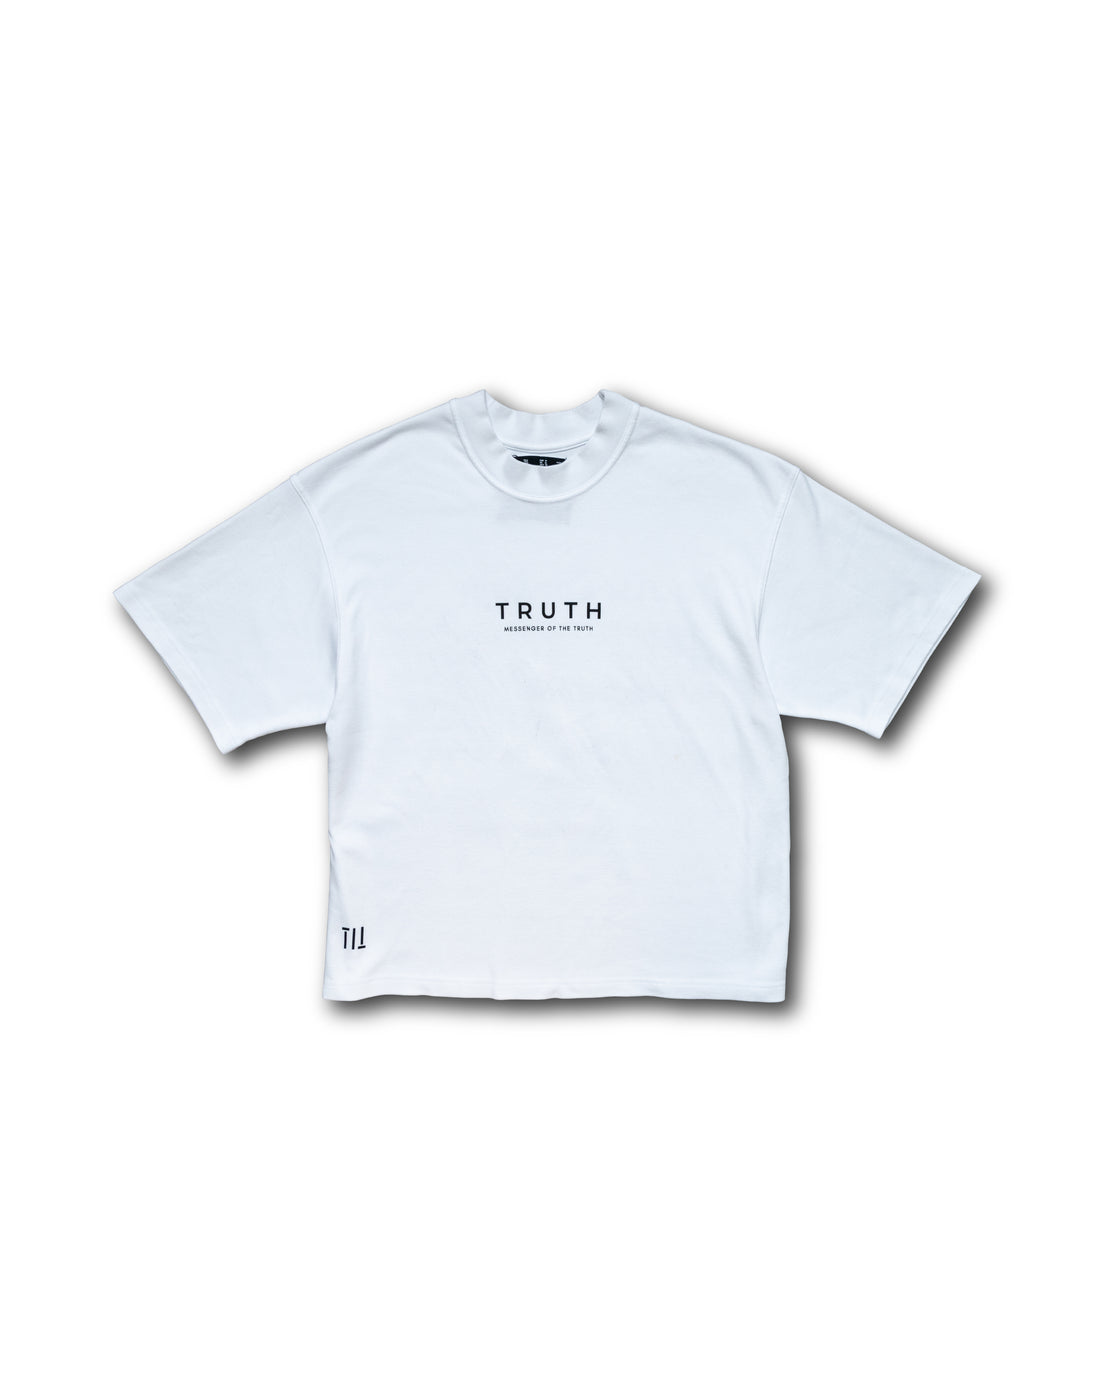 2ND ANNIVERSARY TEE - Members only